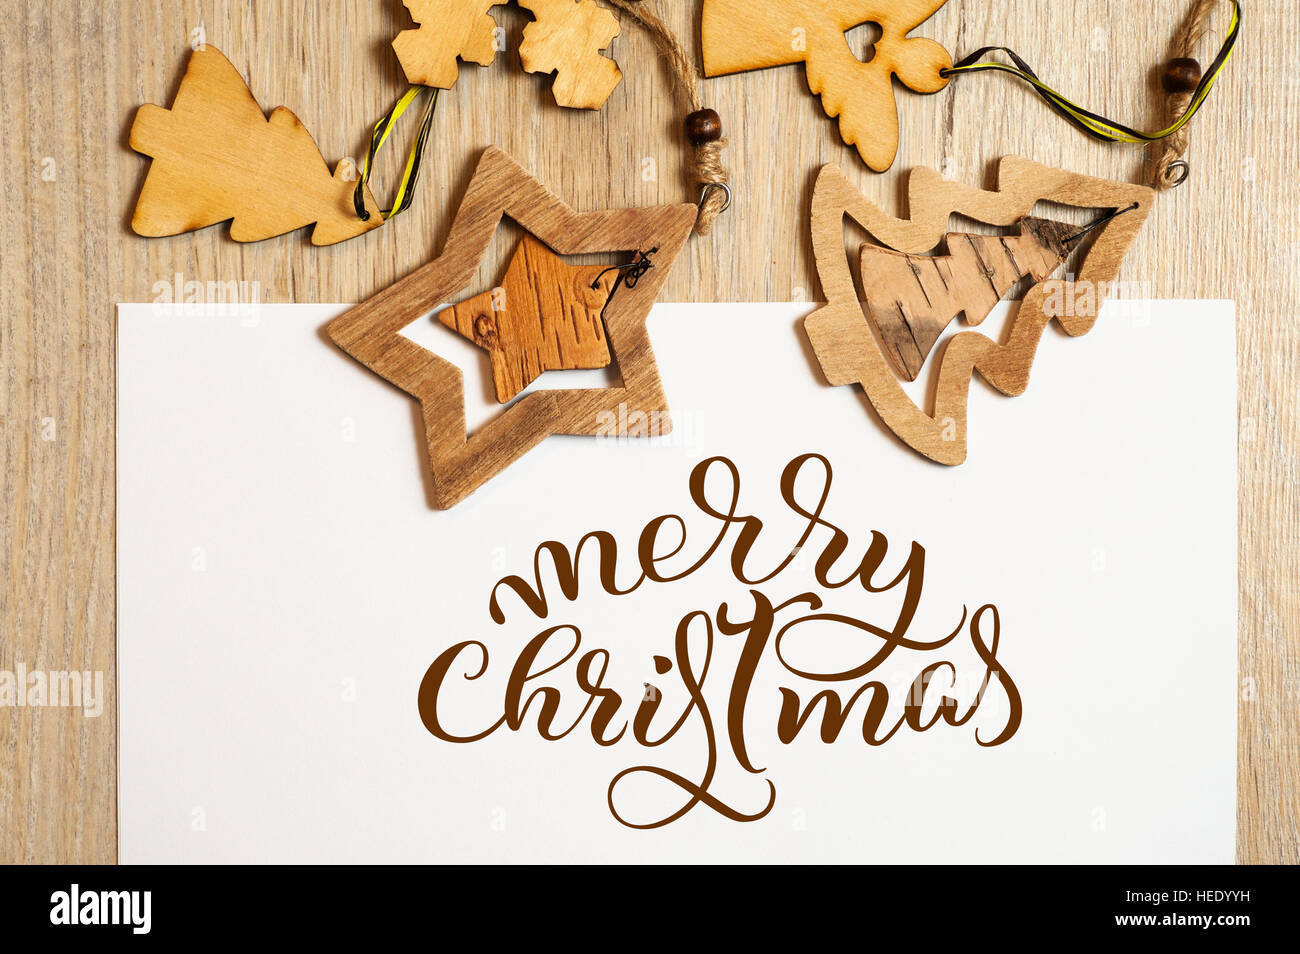 Wooden toys on white background with text Merry Christmas. Calligraphy lettering Stock Photo